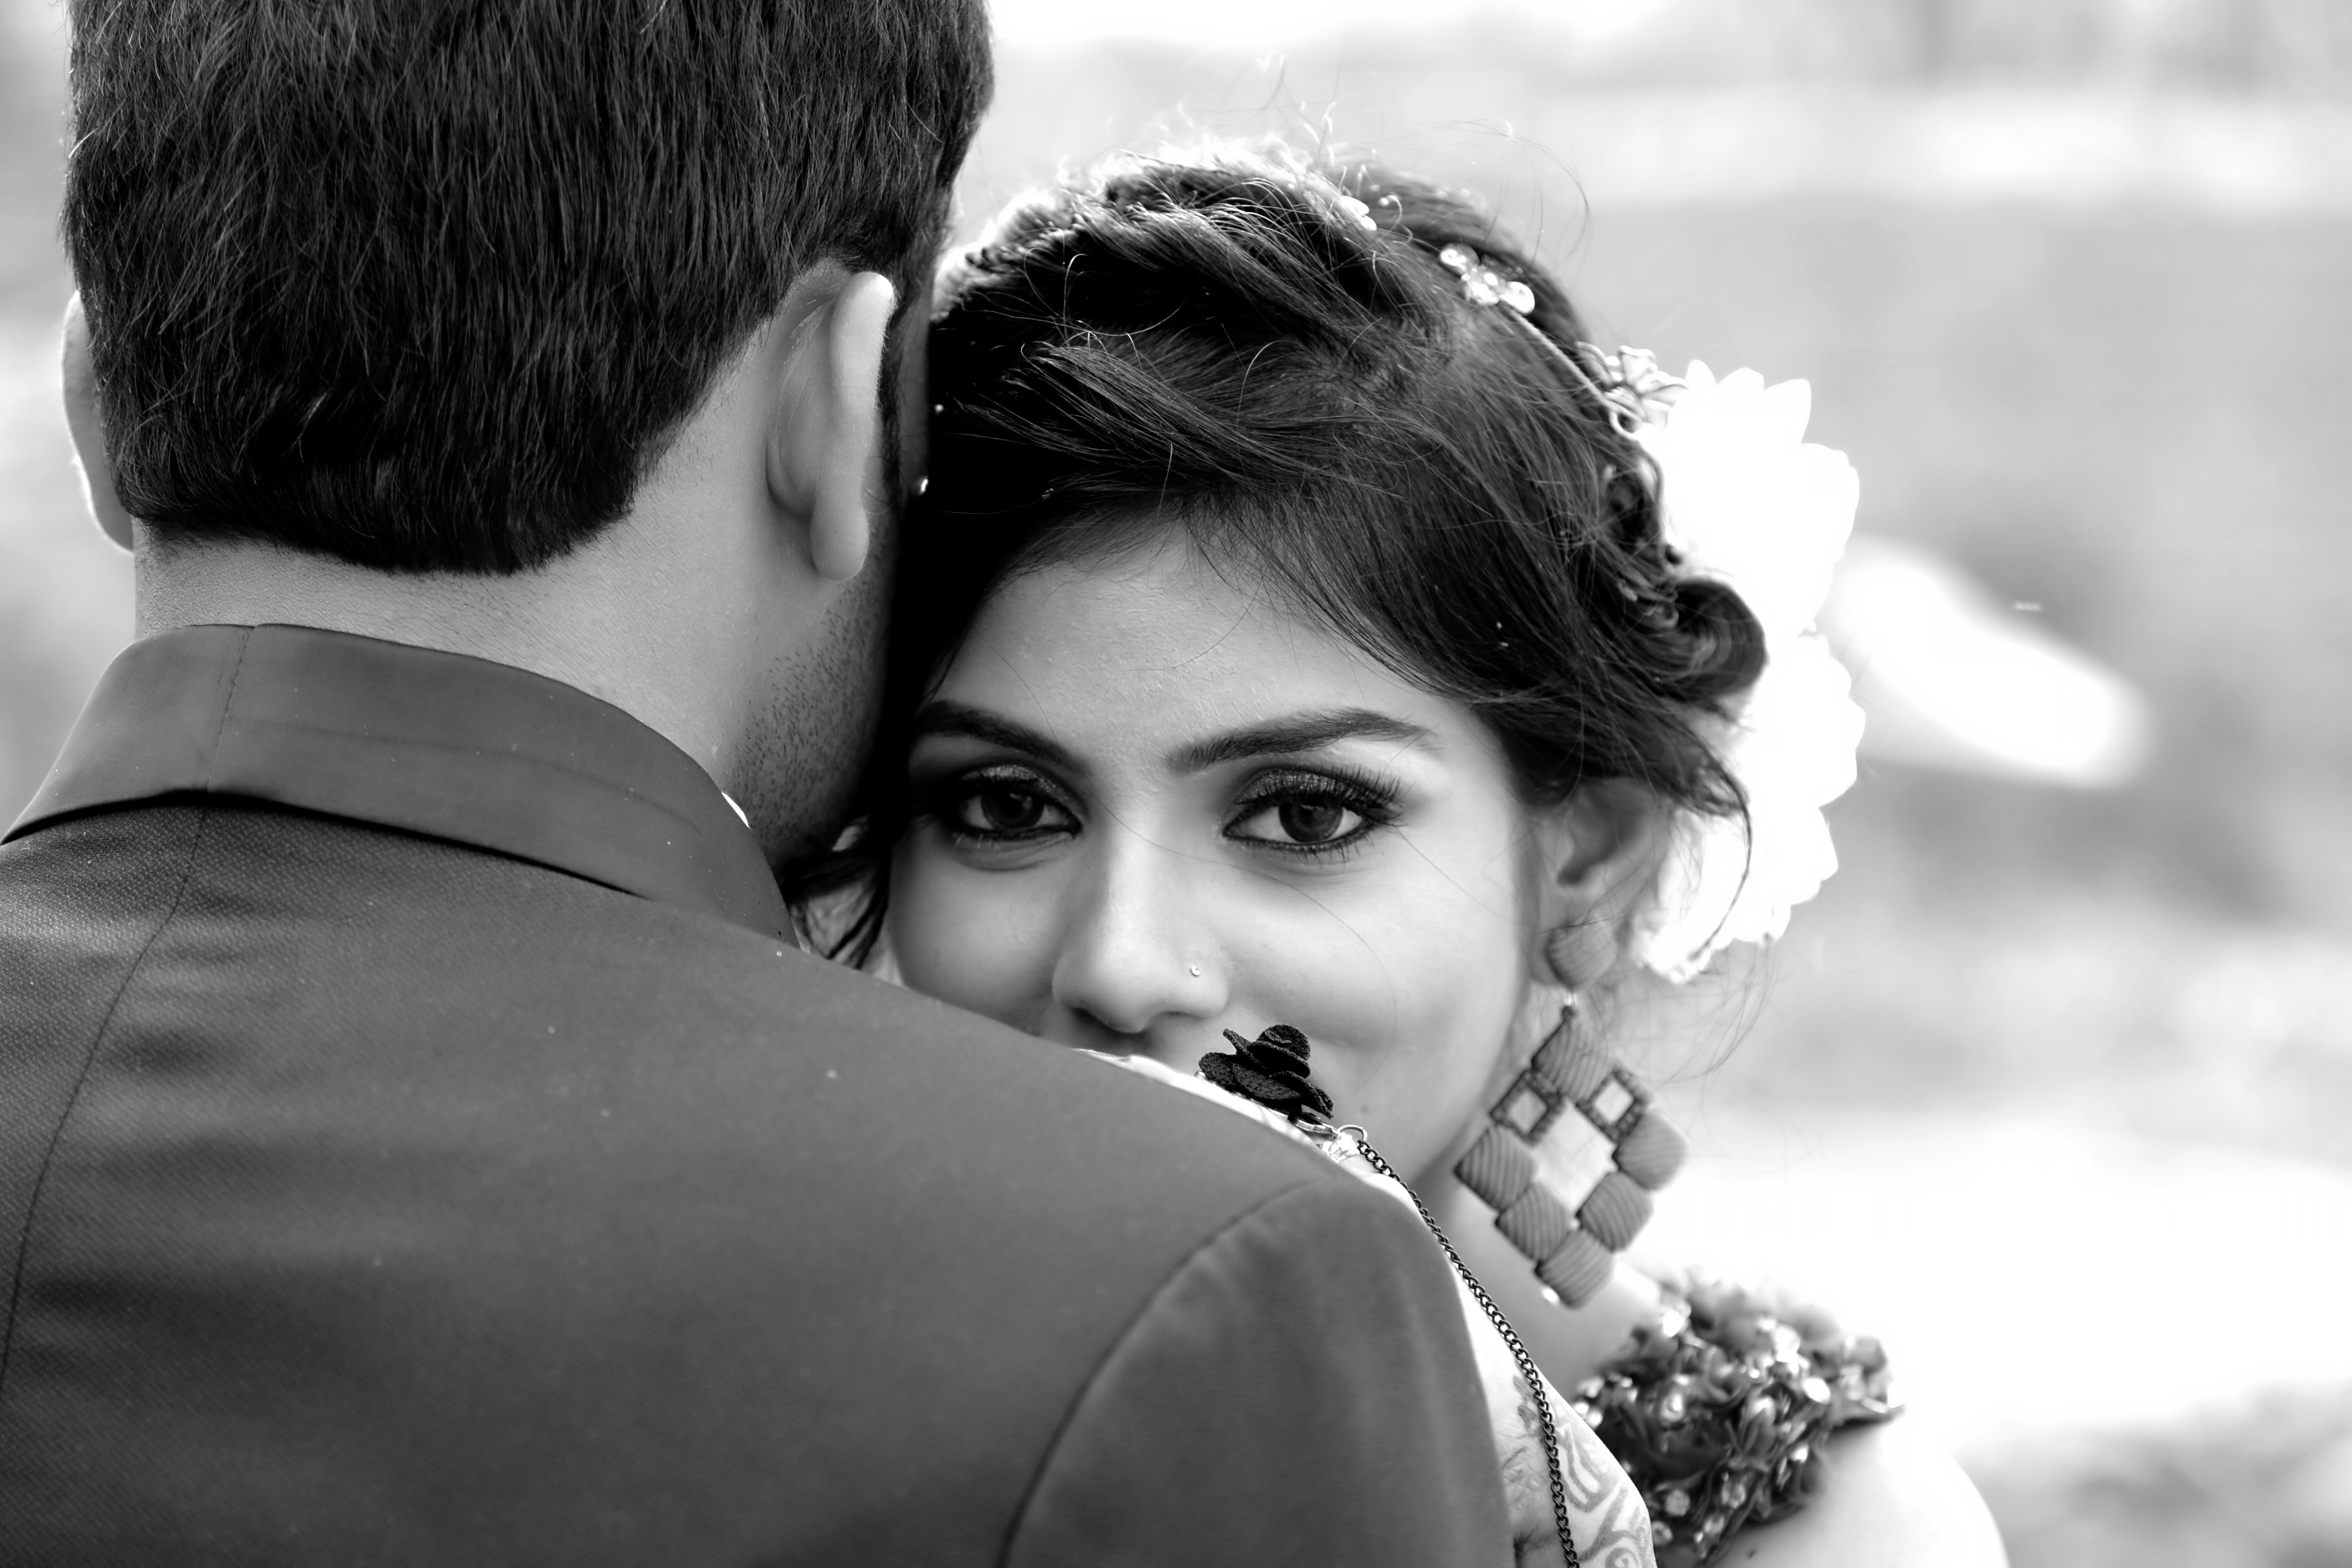 affection-black-and-white-blurred-background-936554.jpg